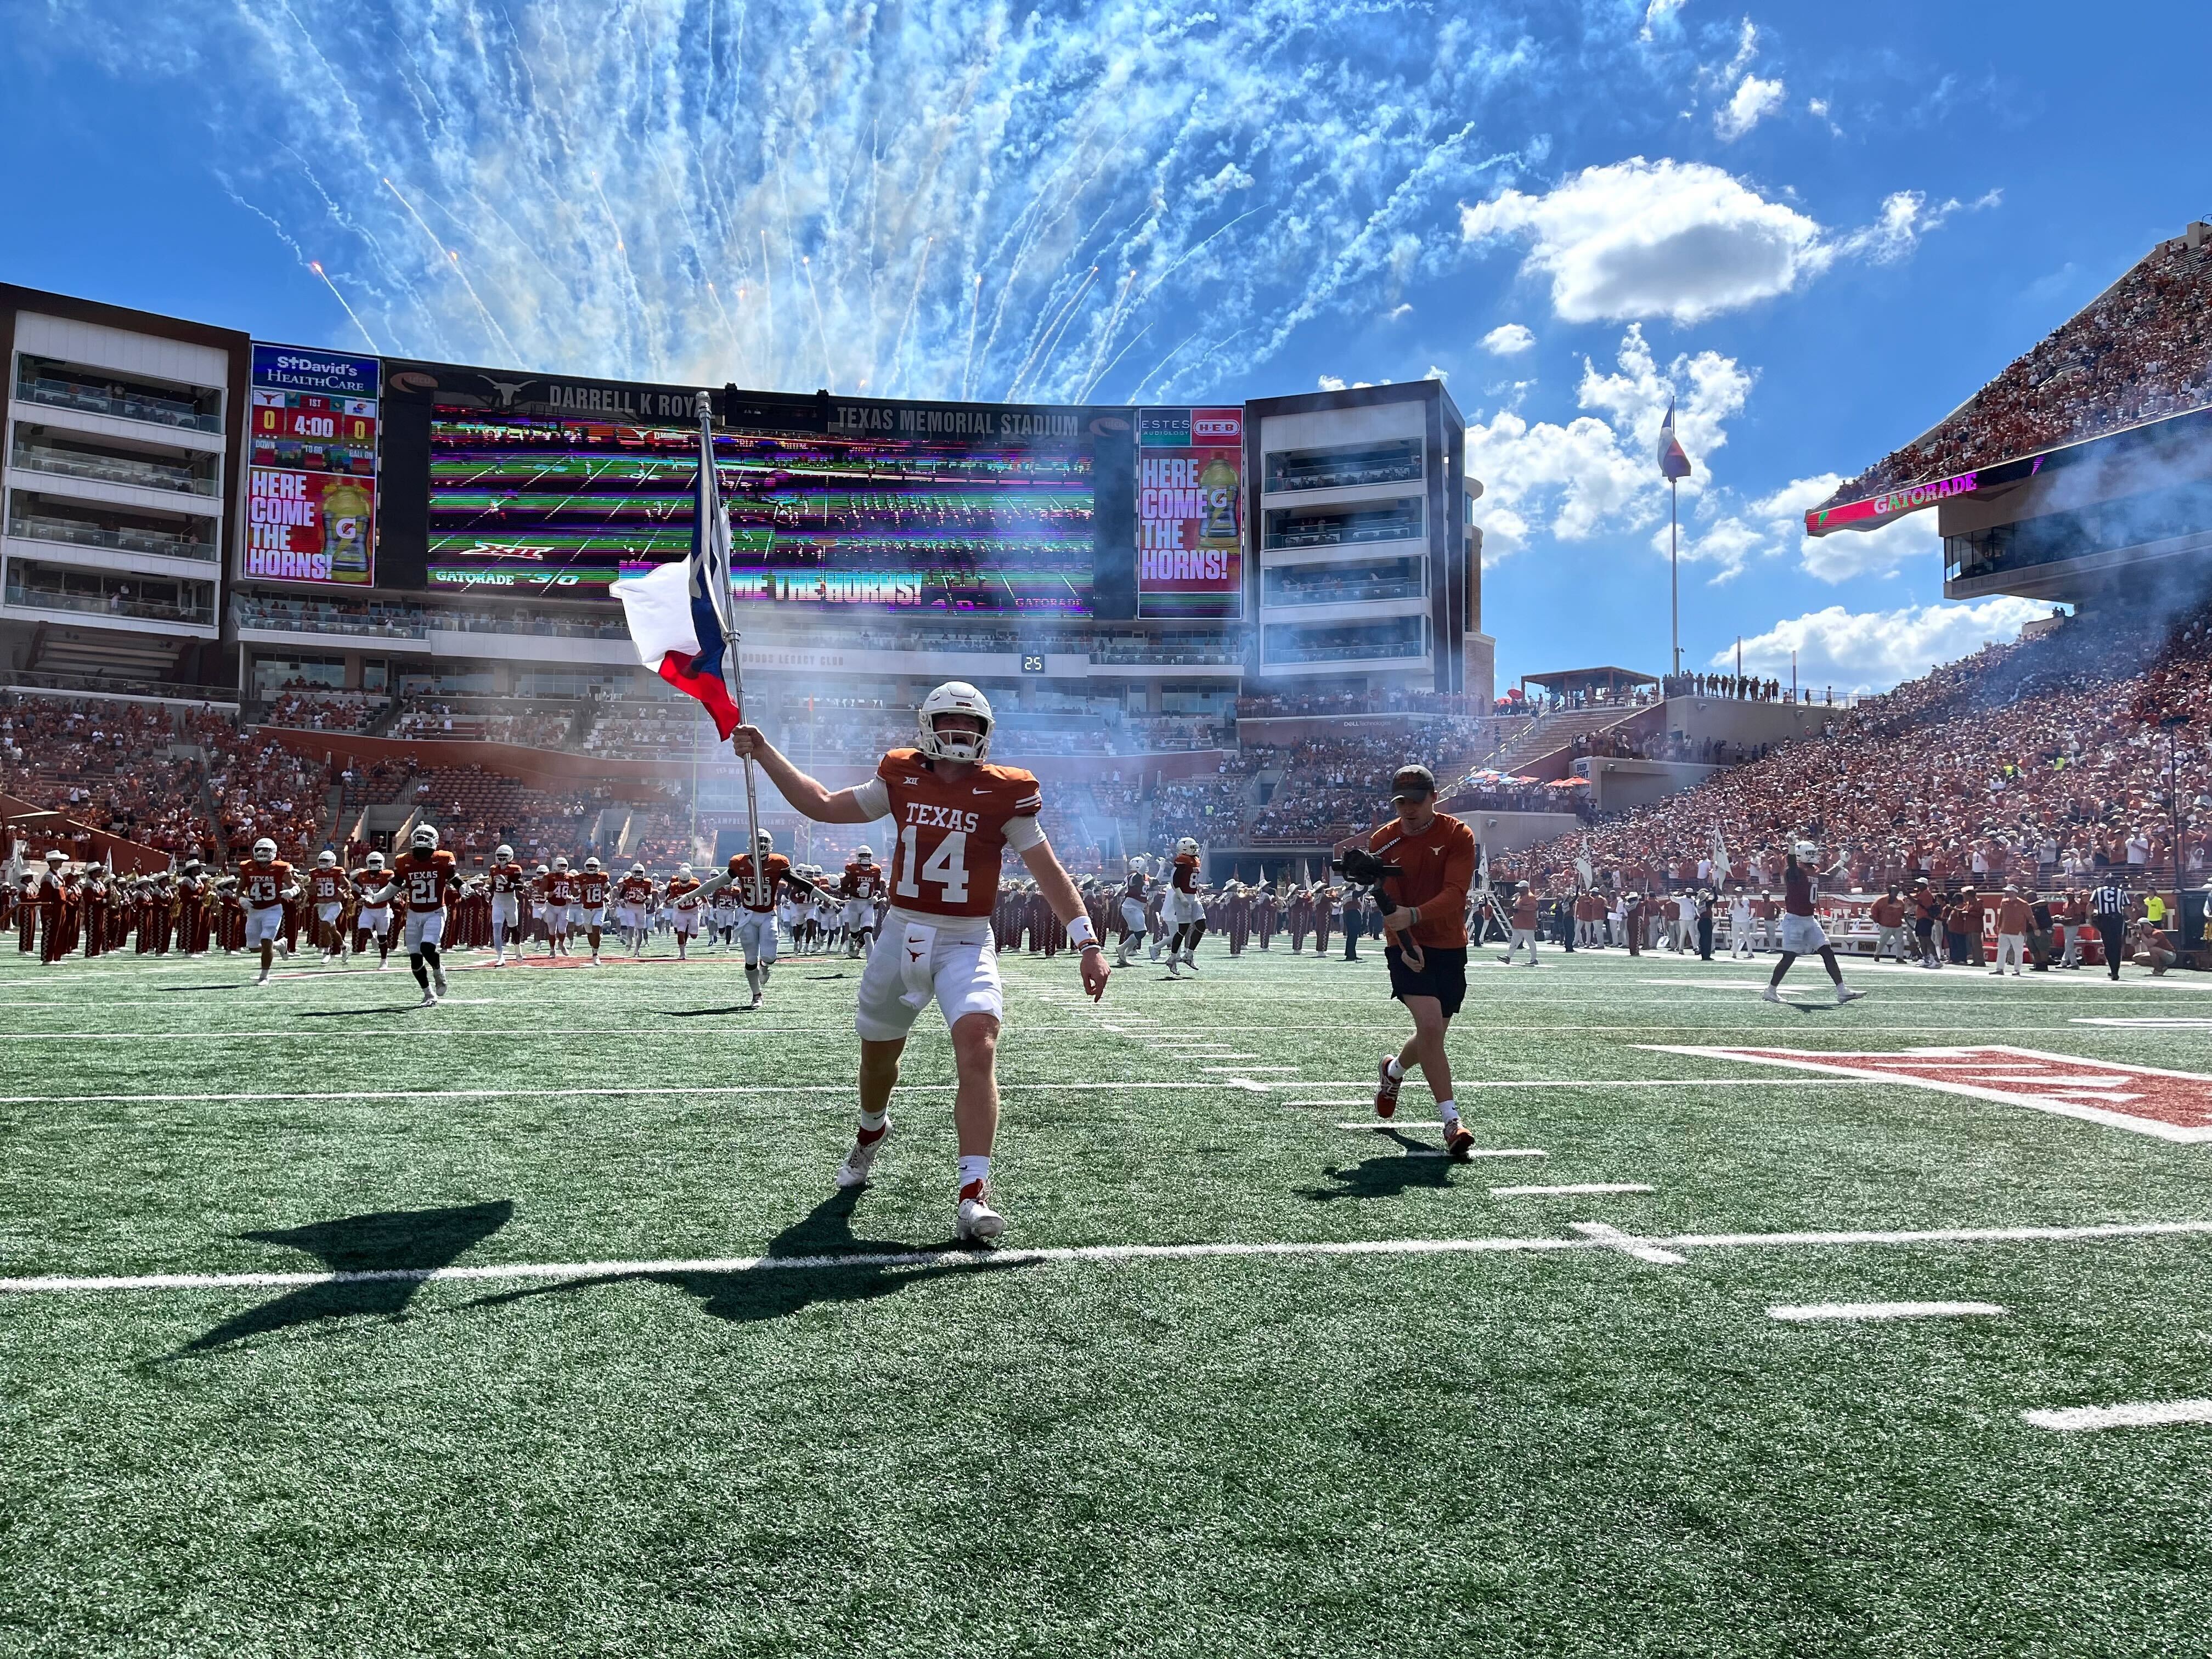 Texas reserve QB Charles Wright runs onto the field with the Texas flag before the Longhorns took on Kansas on Sept. 30 at DKR-Texas Memorial Stadium. (KXAN photo/Blake Devine)